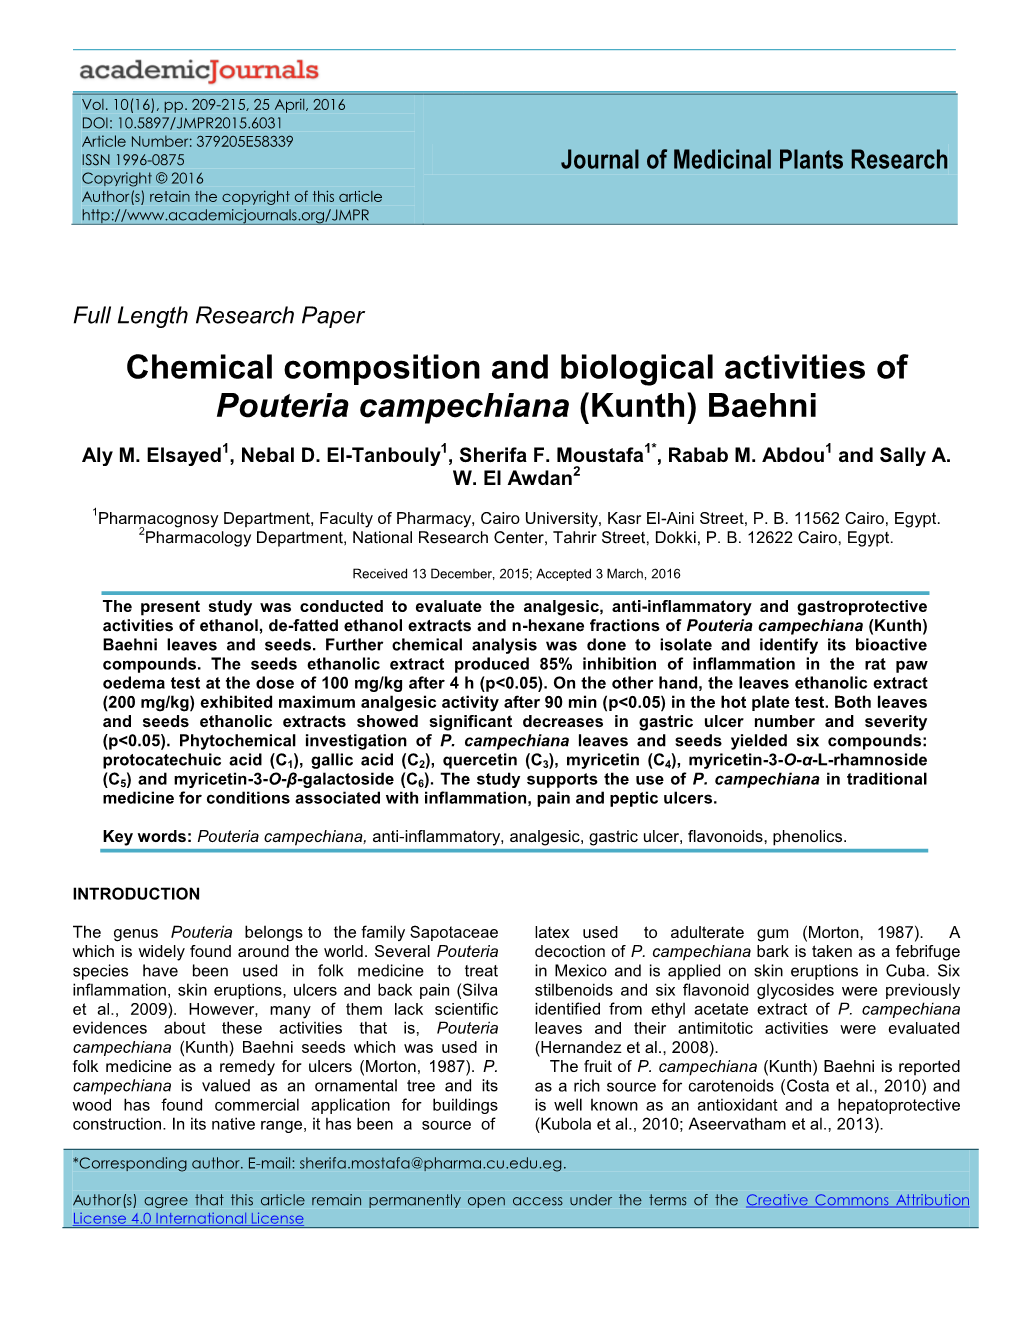 Chemical Composition and Biological Activities of Pouteria Campechiana (Kunth) Baehni